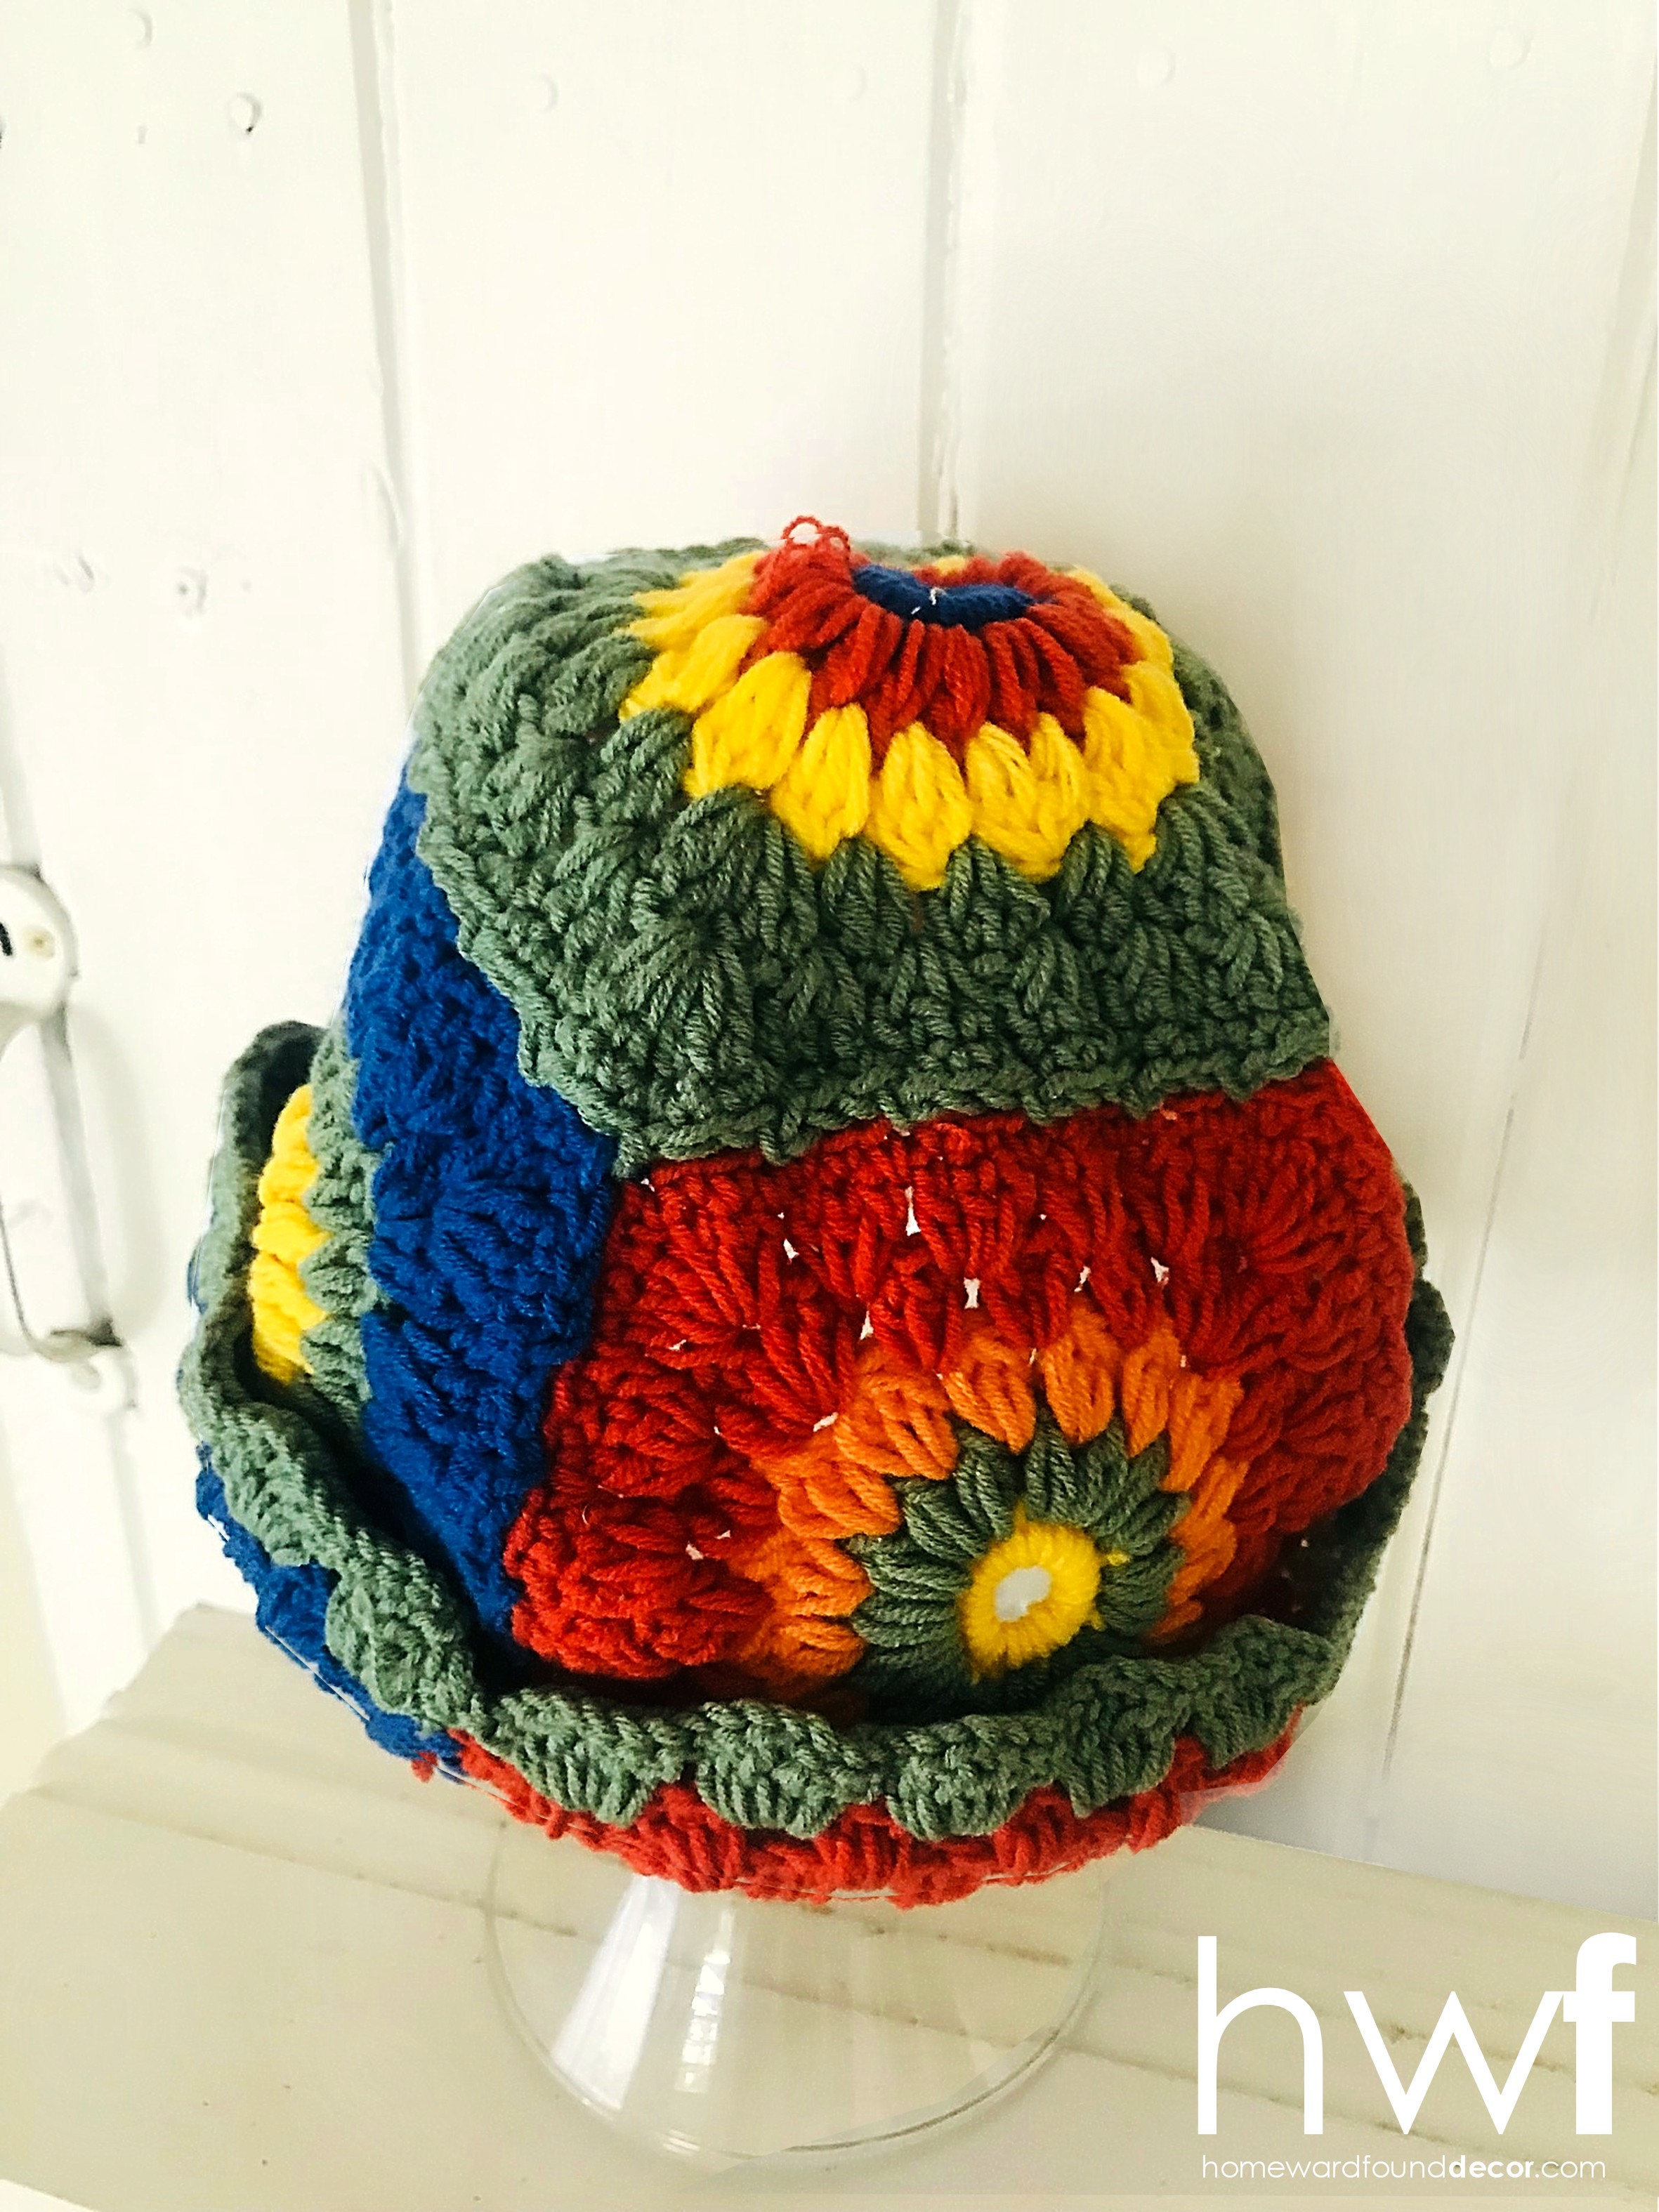 Upcycled Hats- A DIY Project to Make a Designer-Inspired Hat 